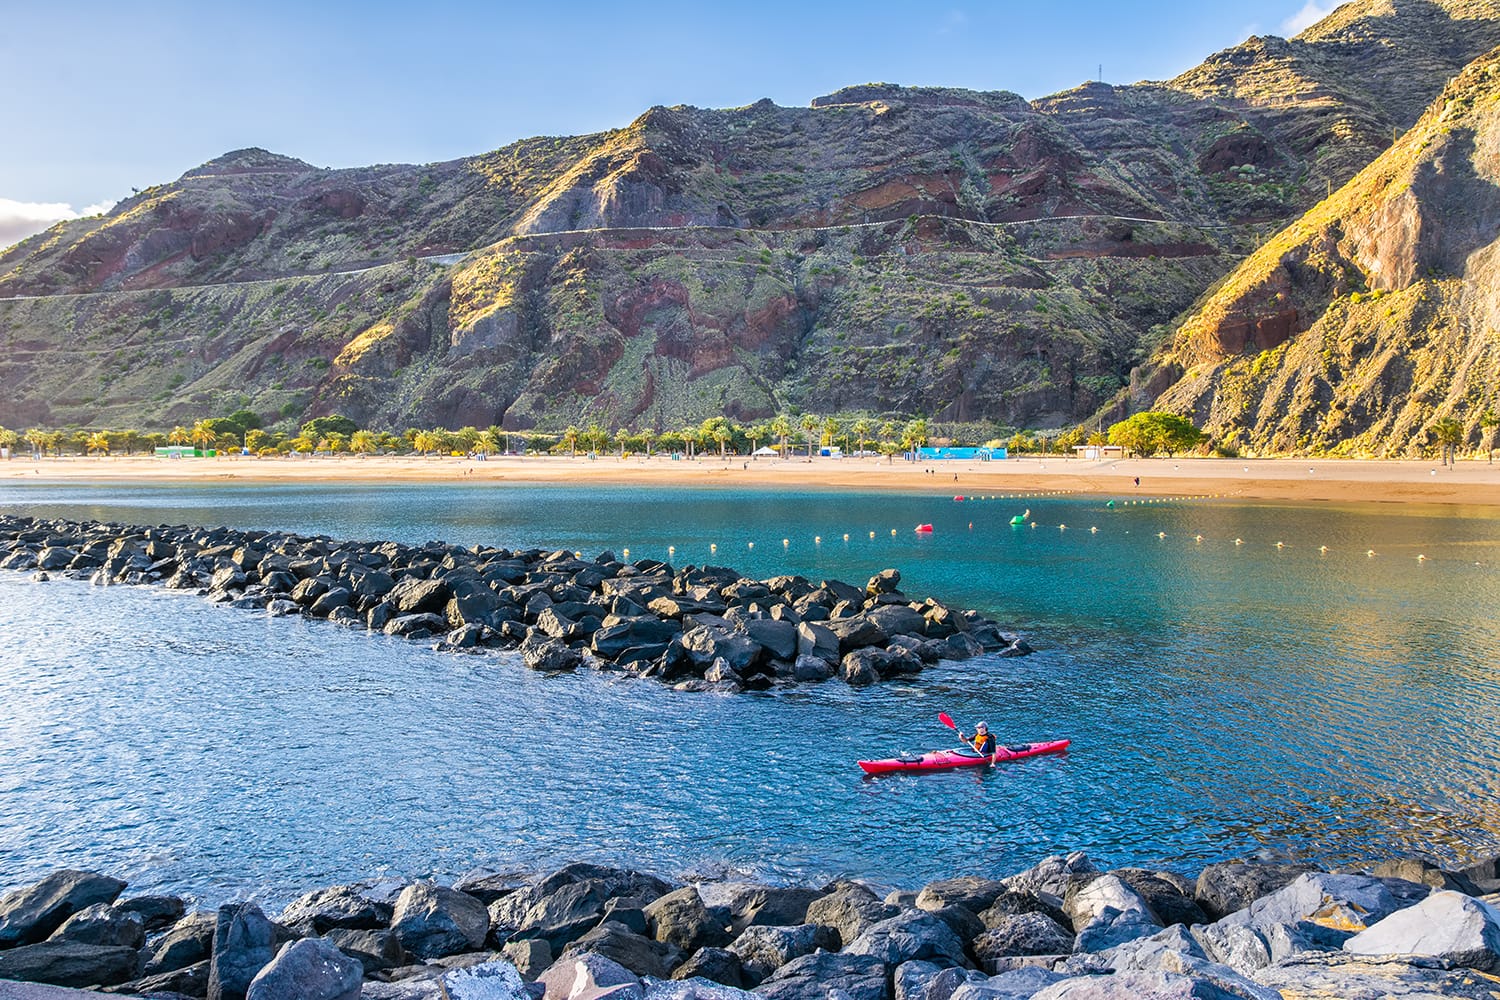 View of beach las Teresitas with yellow sand and with a kayak in the foreground in Santa Cruz de Tenerife, Tenerife, Canary Islands.